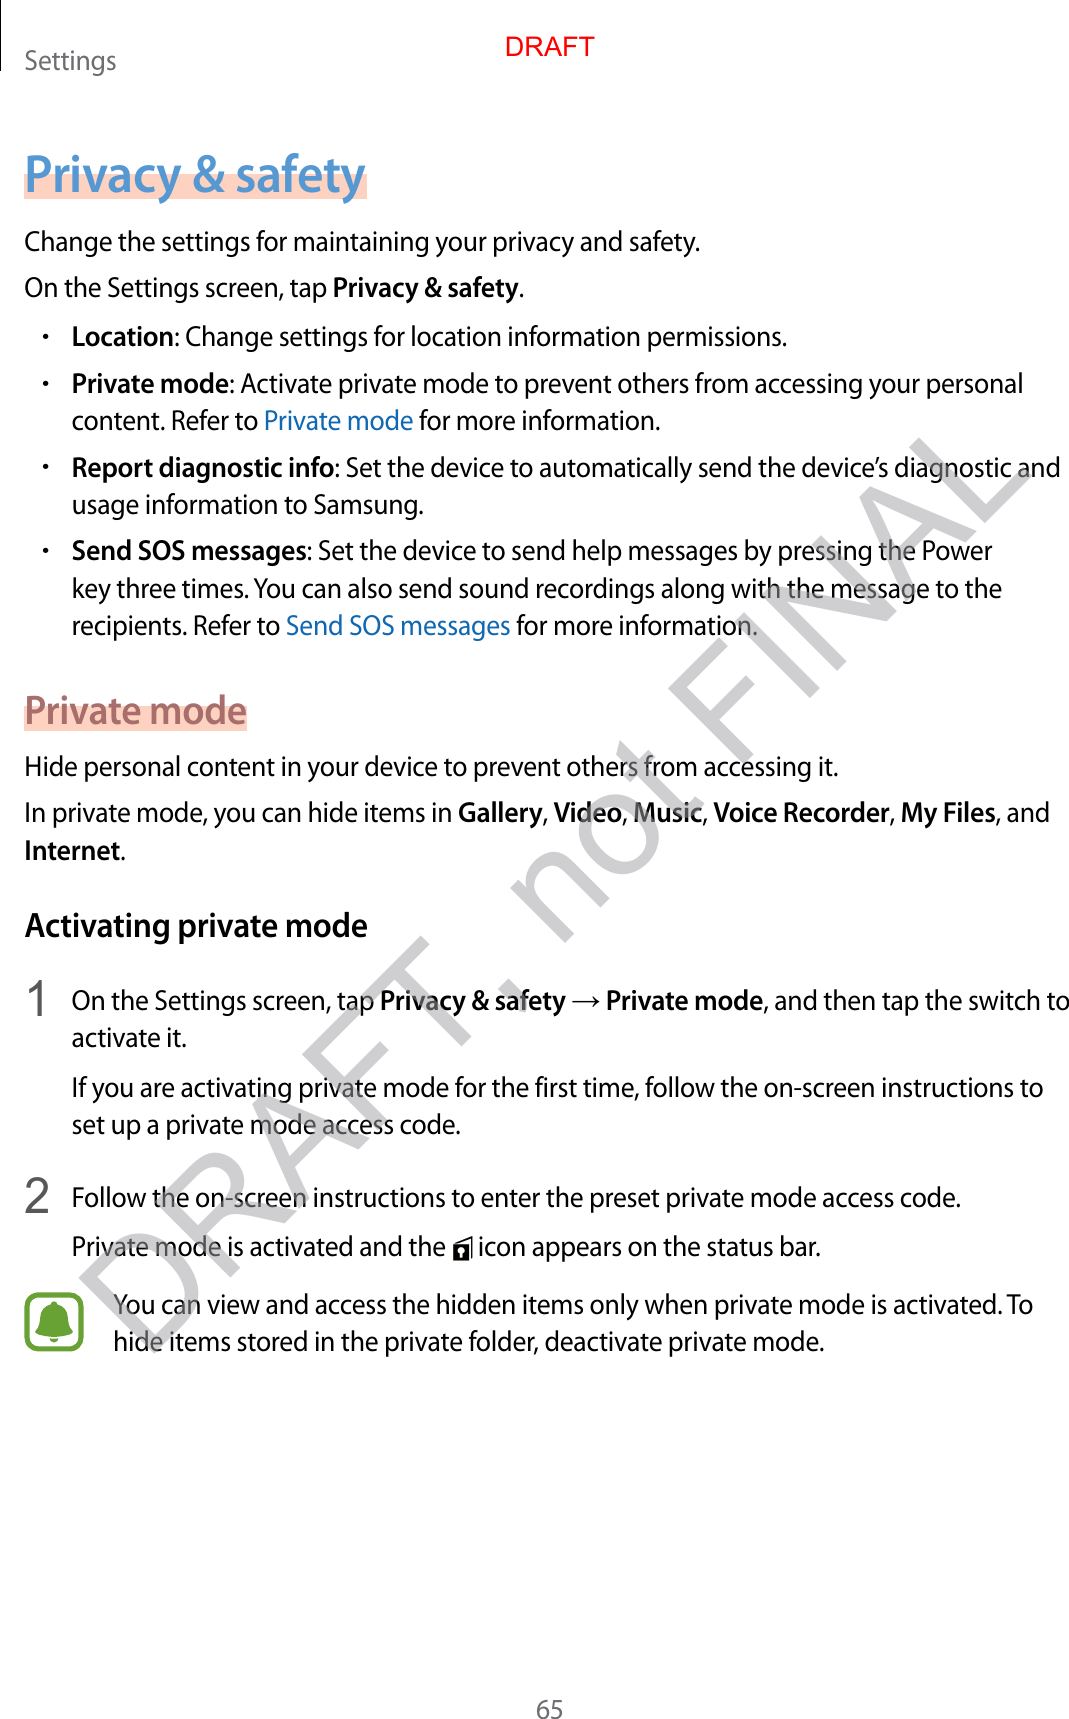 Settings65P rivacy &amp; safetyChange the settings for maintaining y our privacy and safety.On the Settings screen, tap Priv acy &amp; safety.•Location: Change settings for location information permissions.•Priv at e mode: Activate privat e mode t o pr ev ent others fr om ac cessing y our personal conten t. Ref er t o P riva te mode f or mor e information.•Report diagnostic info: Set the device to automatically send the devic e’s diagnostic and usage information t o Samsung .•Send SOS messages: Set the device to send help messages by pr essing the Power key three times . You can also send sound recordings along with the message t o the recipients . Ref er t o Send SOS messages for mor e information.Priv a te modeHide personal content in y our device t o pr ev ent others fr om ac c essing it.In private mode, y ou can hide it ems in Gallery, Video, Music, Voice Recor der, My F iles, and Internet.Activating priv at e mode1  On the Settings screen, tap Priv acy &amp; safety → Priv at e mode, and then tap the switch to activate it.If you are activating private mode for the first time, follo w the on-scr een instructions to set up a private mode acc ess c ode .2  Follow the on-screen instructions to enter the pr eset privat e mode ac cess c ode .Priva te mode is activated and the   icon appears on the status bar.You can view and access the hidden items only when private mode is activated . To hide items stor ed in the privat e f older, deactivate private mode .DRAFTDRAFT, not FINAL